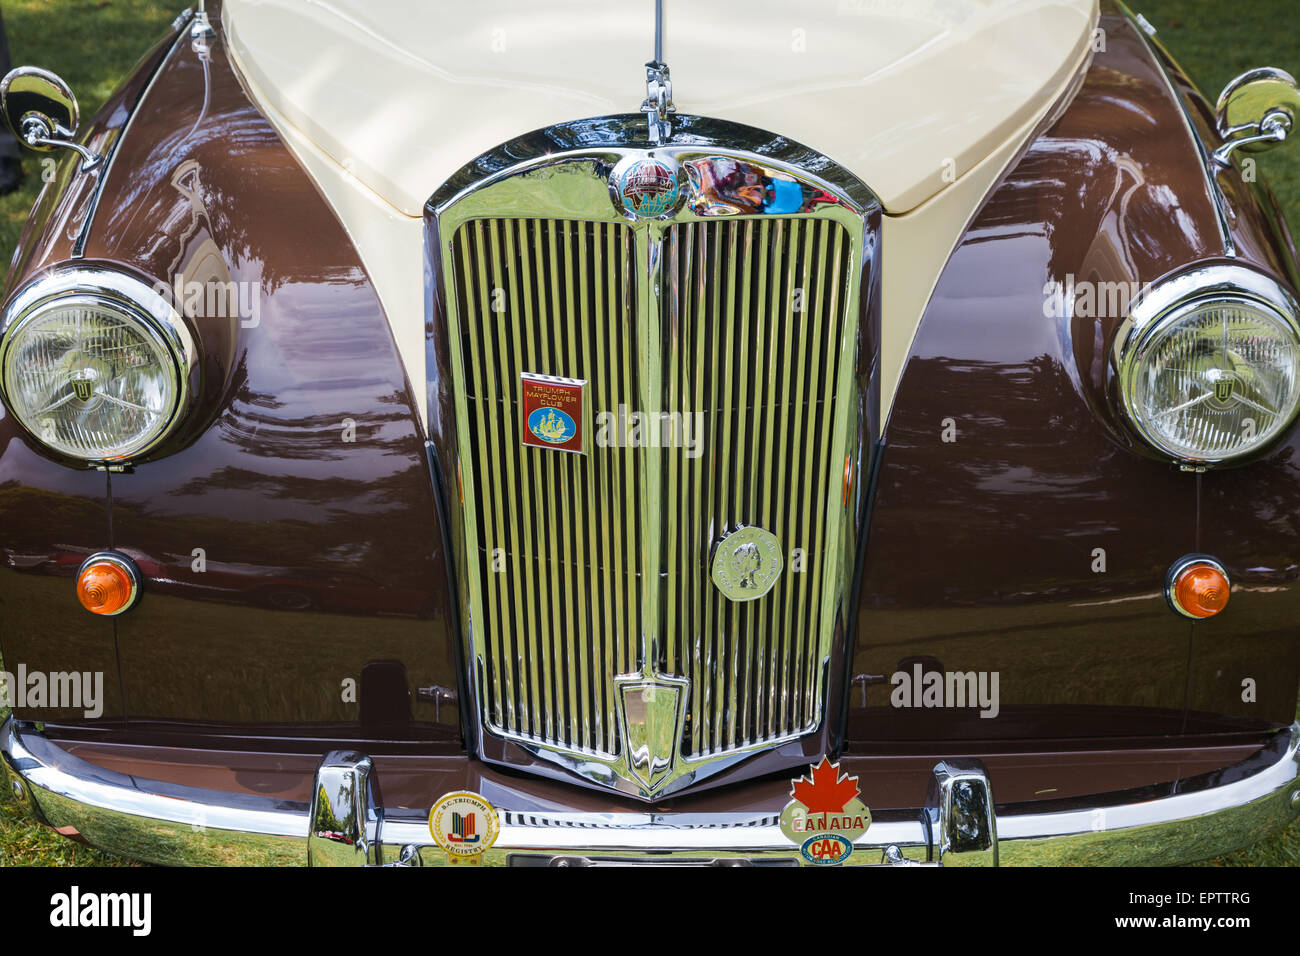 Front view of a Triumph Mayflower car on show at a meet in Vancouver Stock Photo